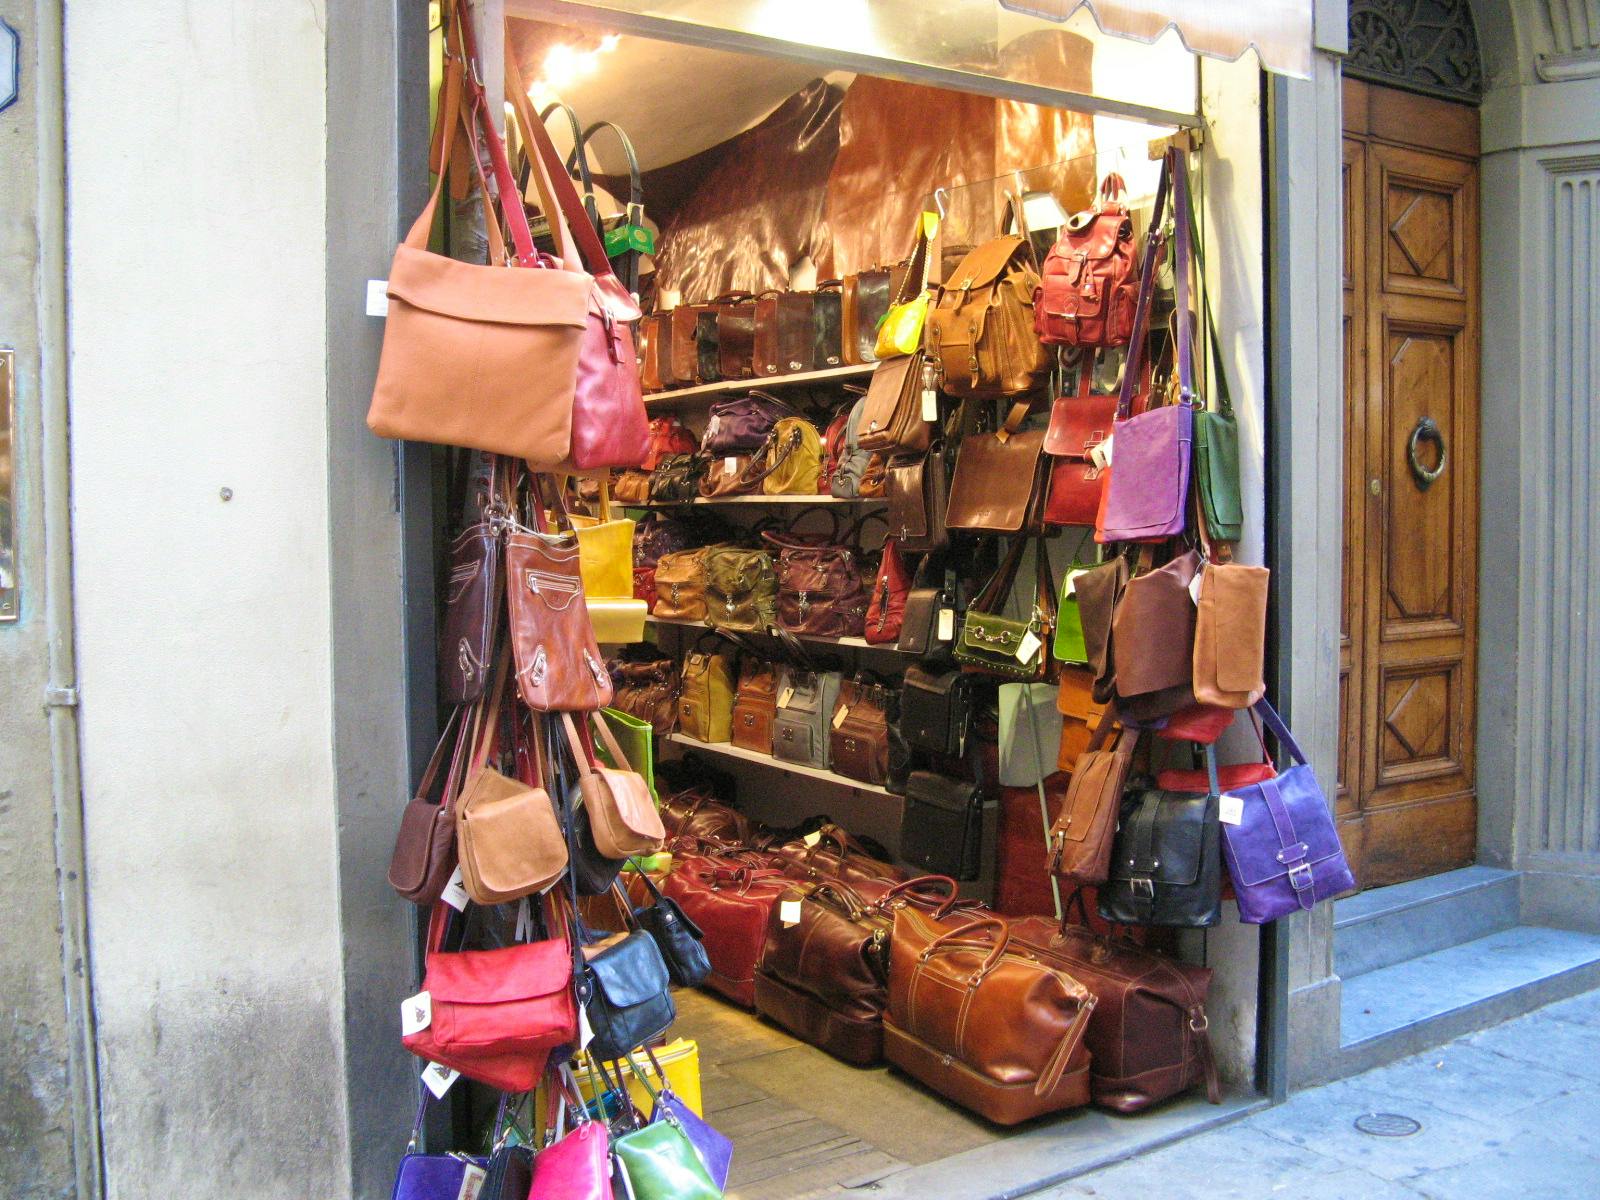 Stores and retailers of leather bags and wallets